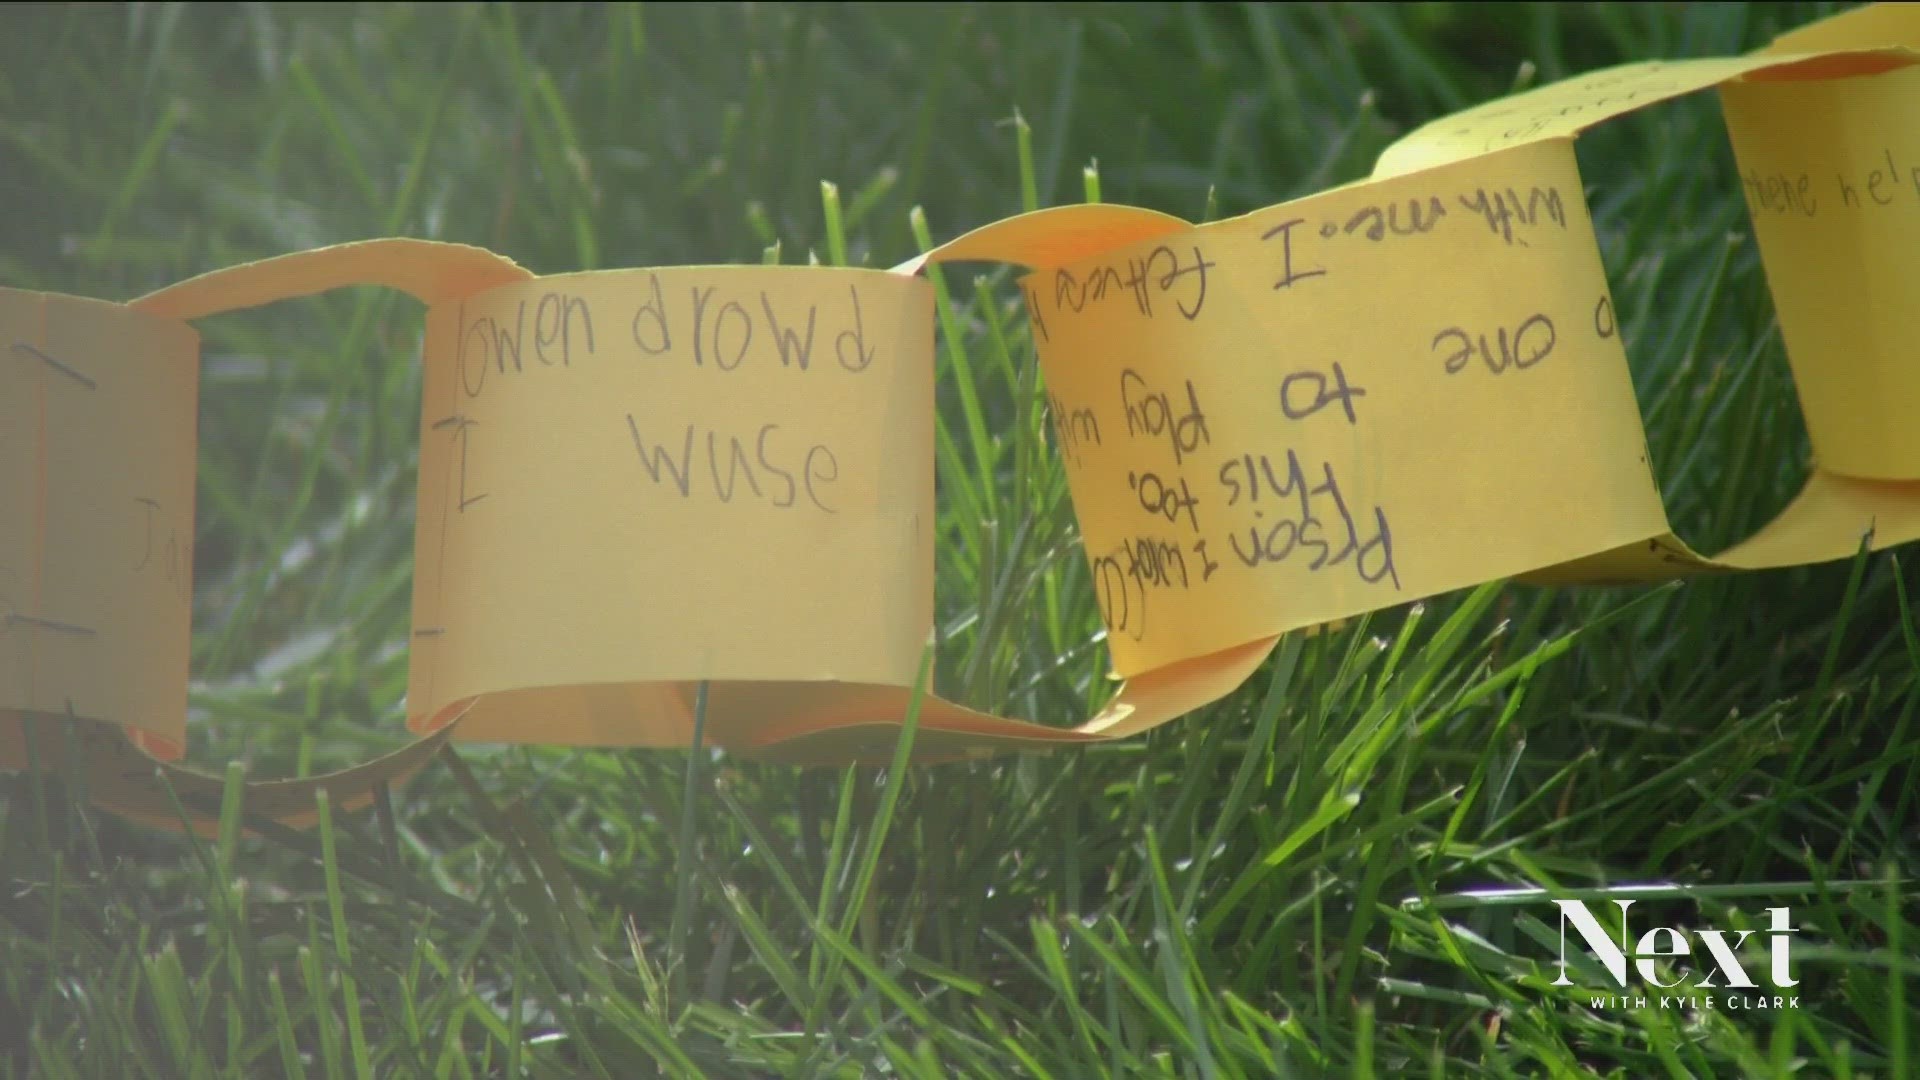 Students from Schaffer Elementary in Littleton invited us to their field day for a lesson on kindness.